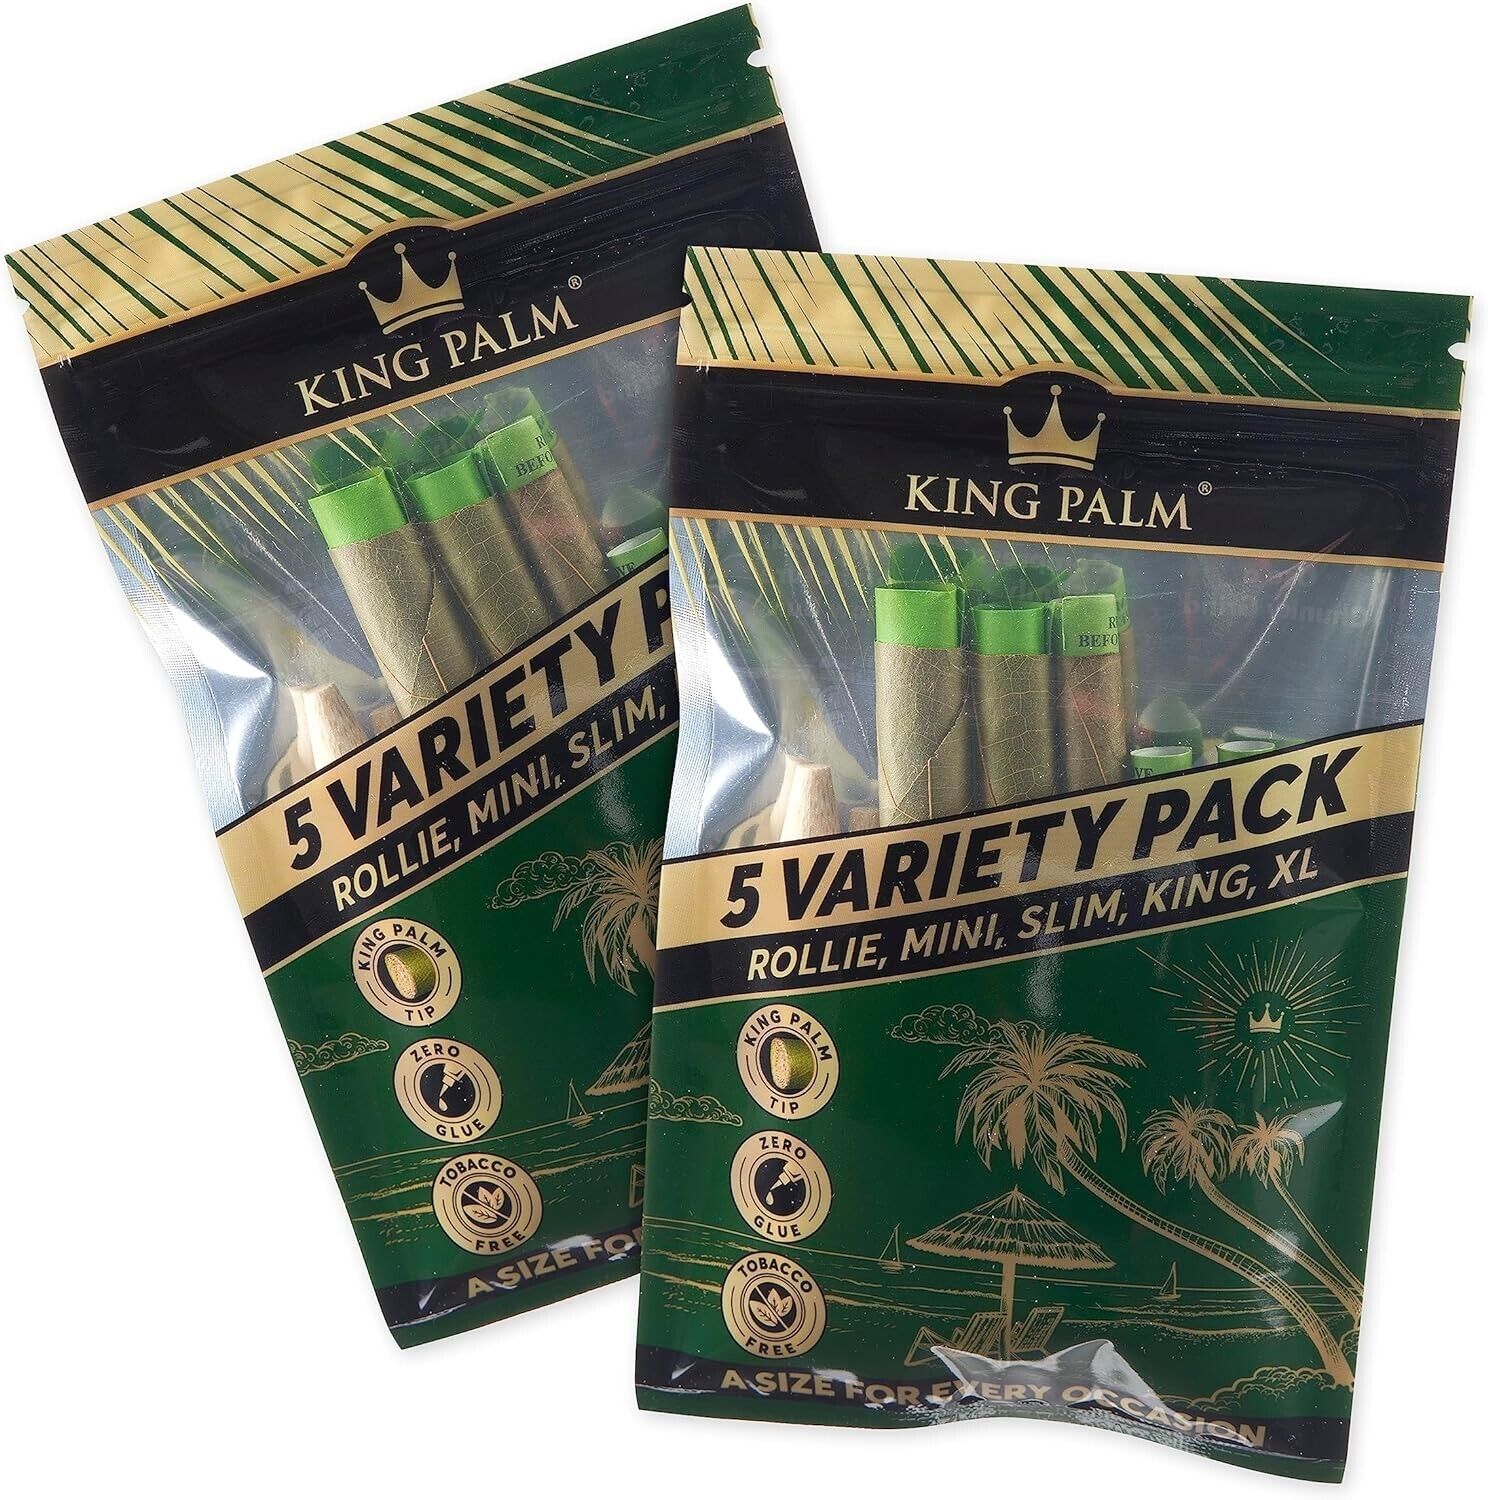 KingPalm Variety Size Cones -5Cones,1 of each Rollie,Mini, Slim,King, XL,Loose,2